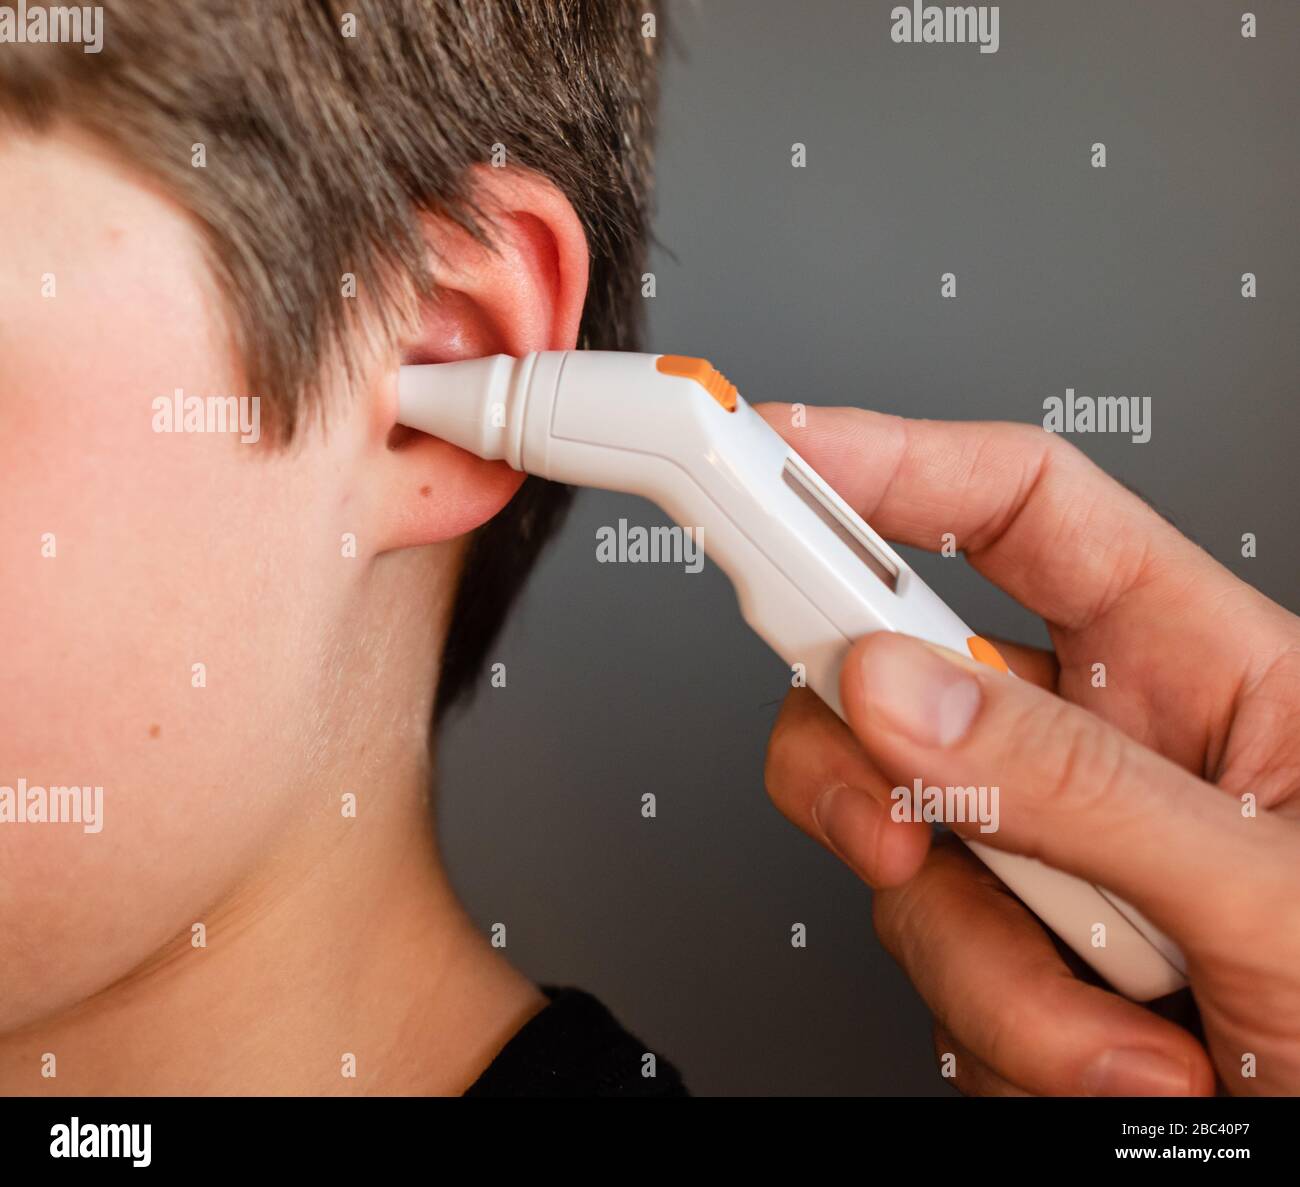 Close up of child getting temperature taken with an ear thermometer. Stock Photo